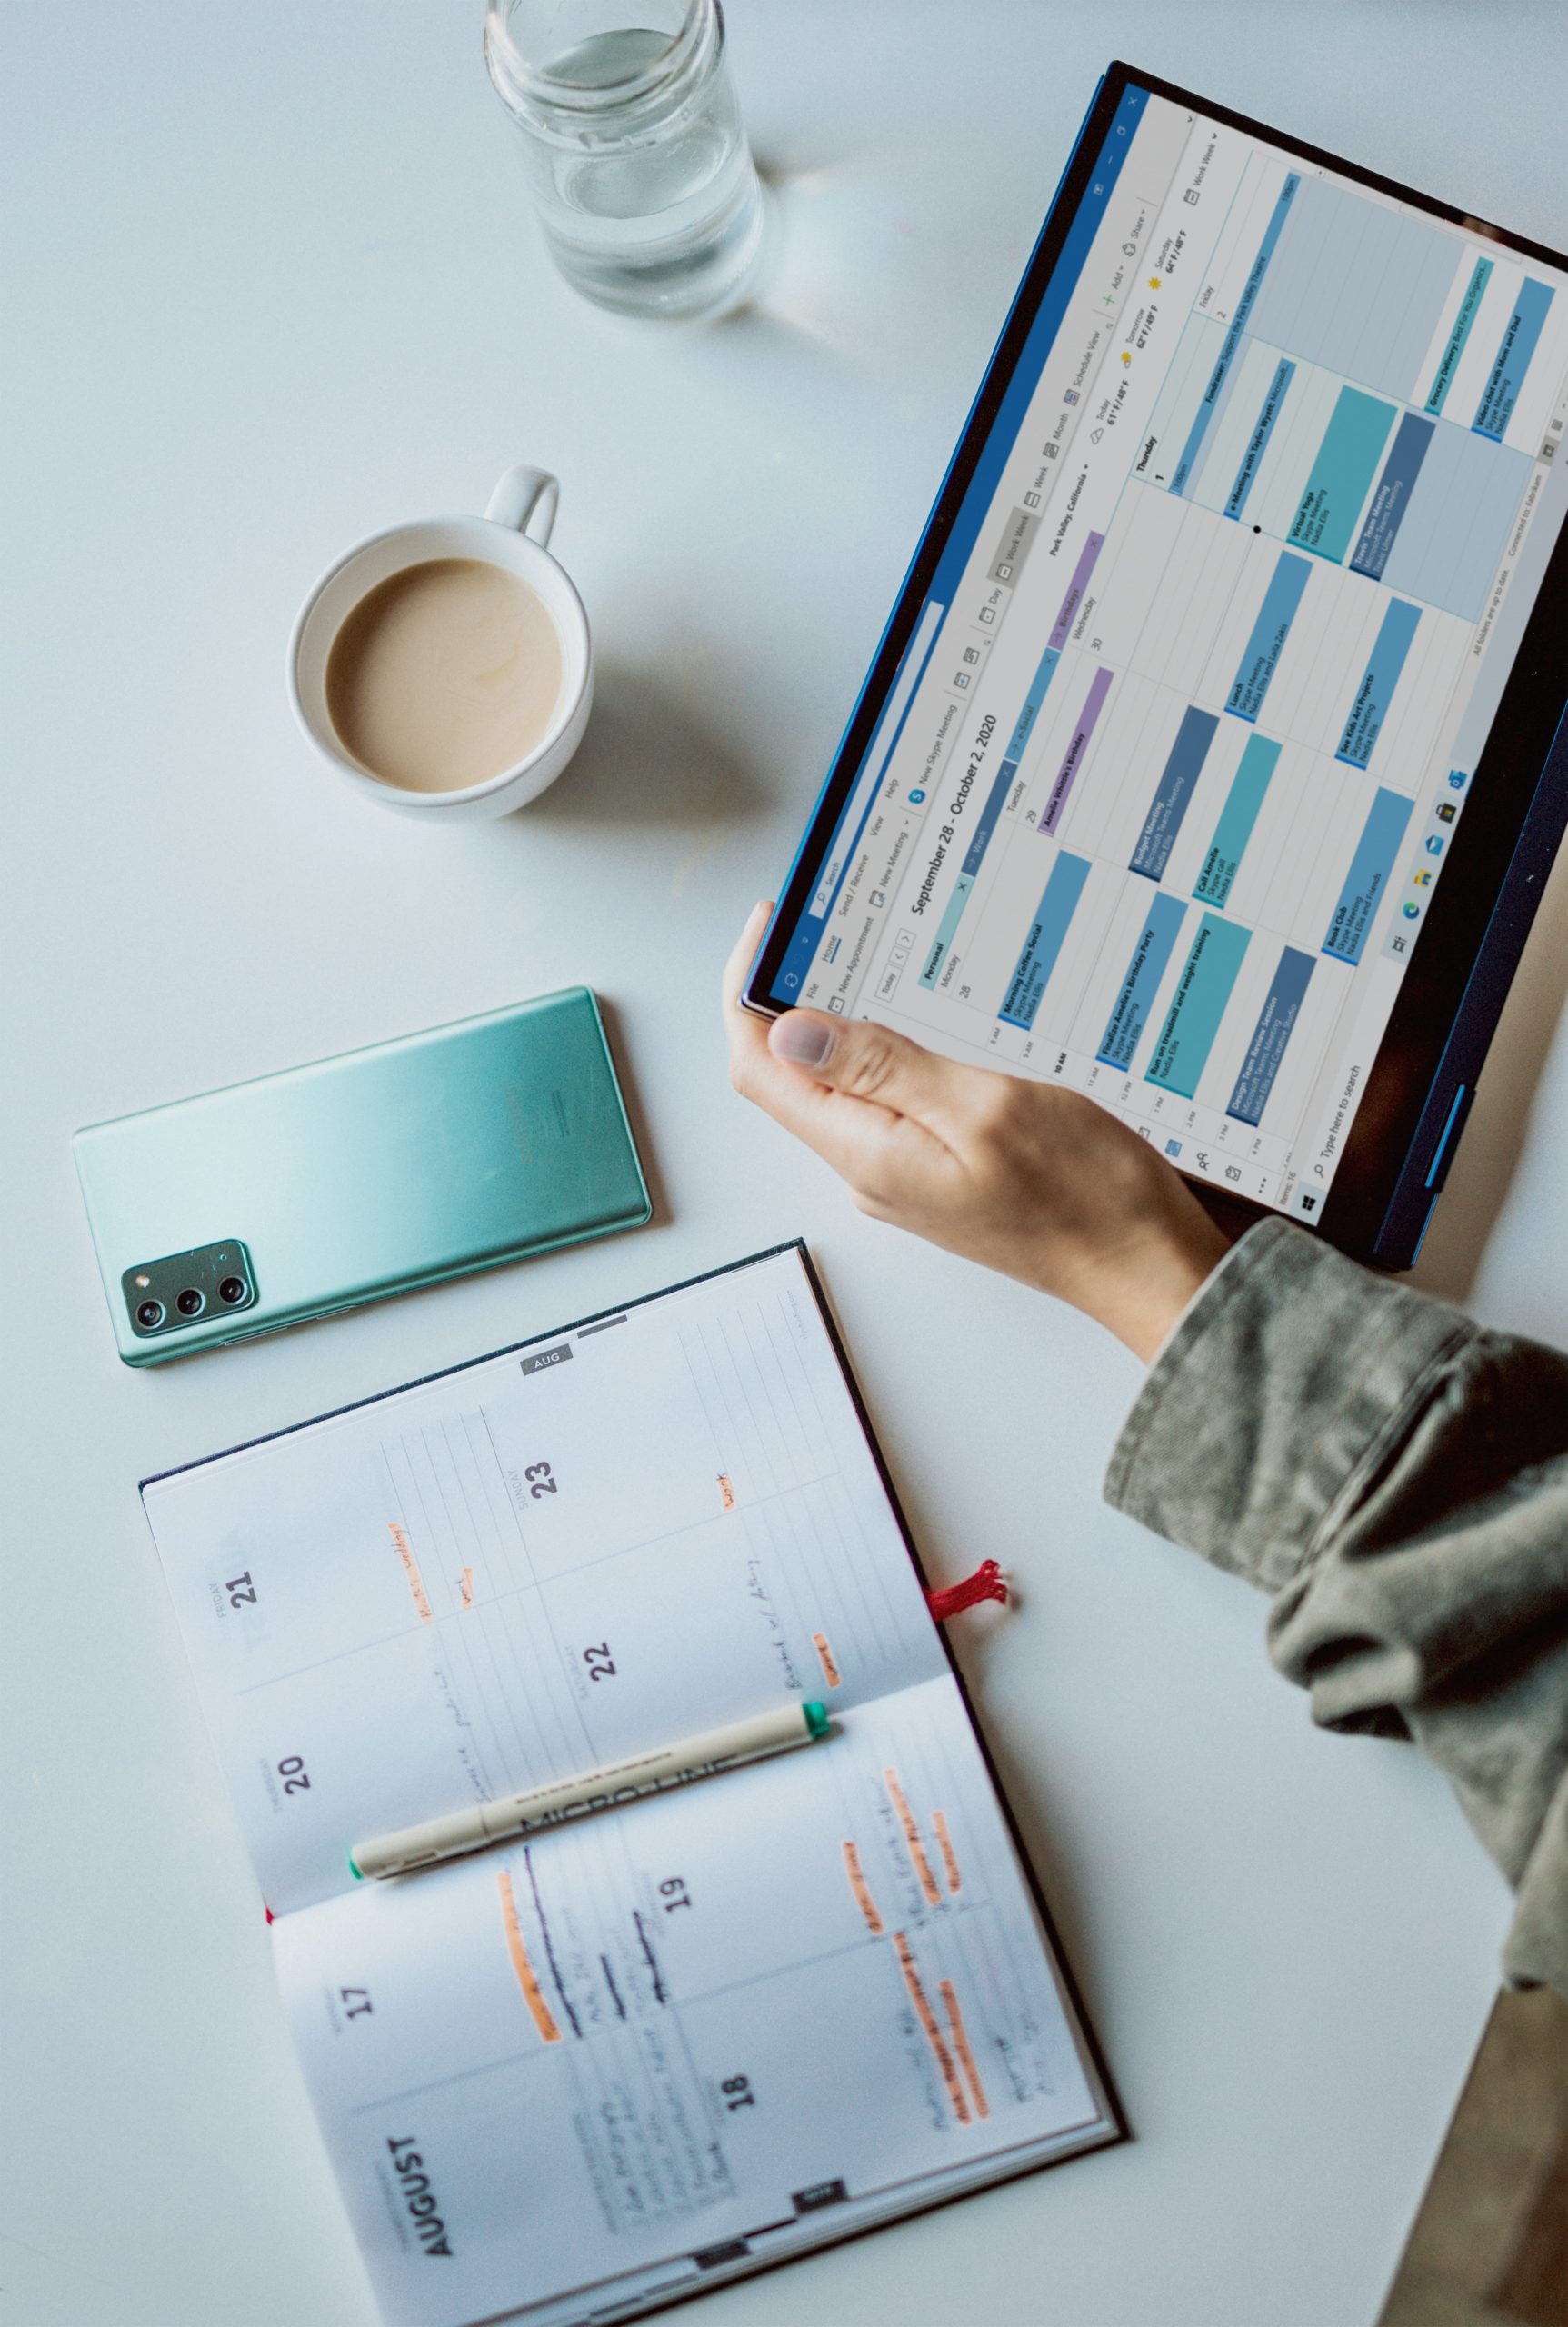 Why you need a content calendar and how to make one